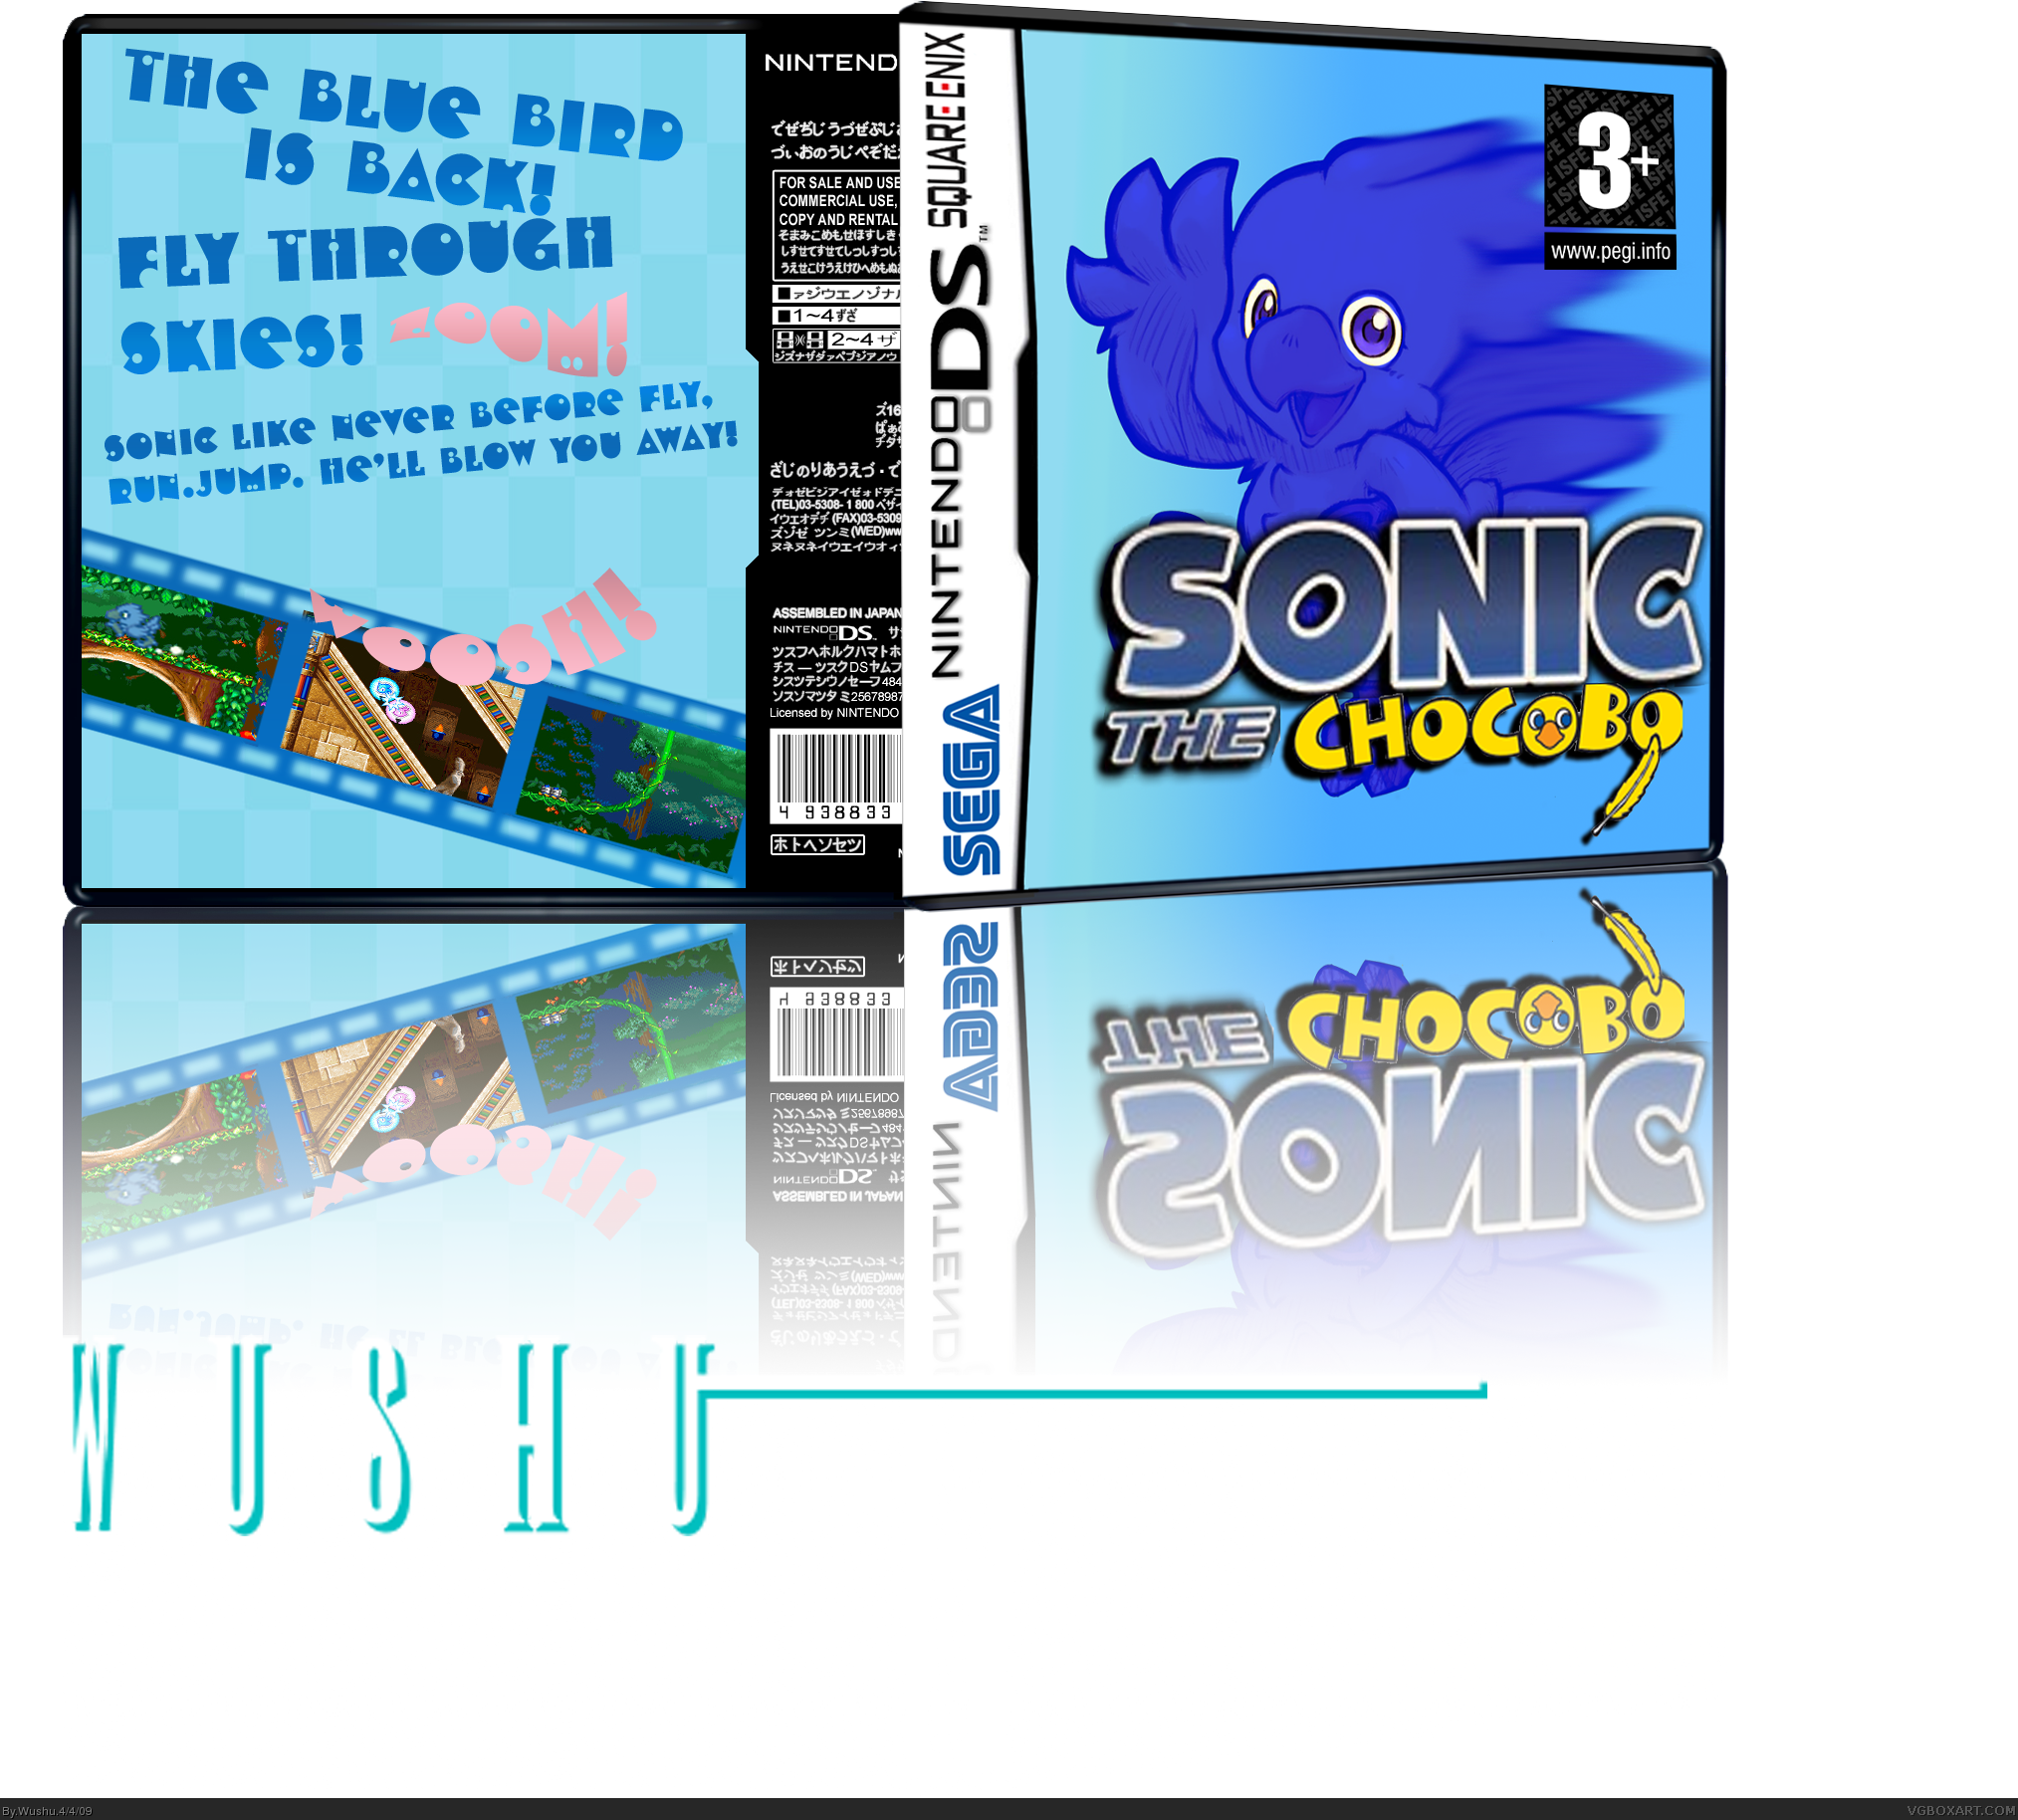 Sonic the Chocobo box cover